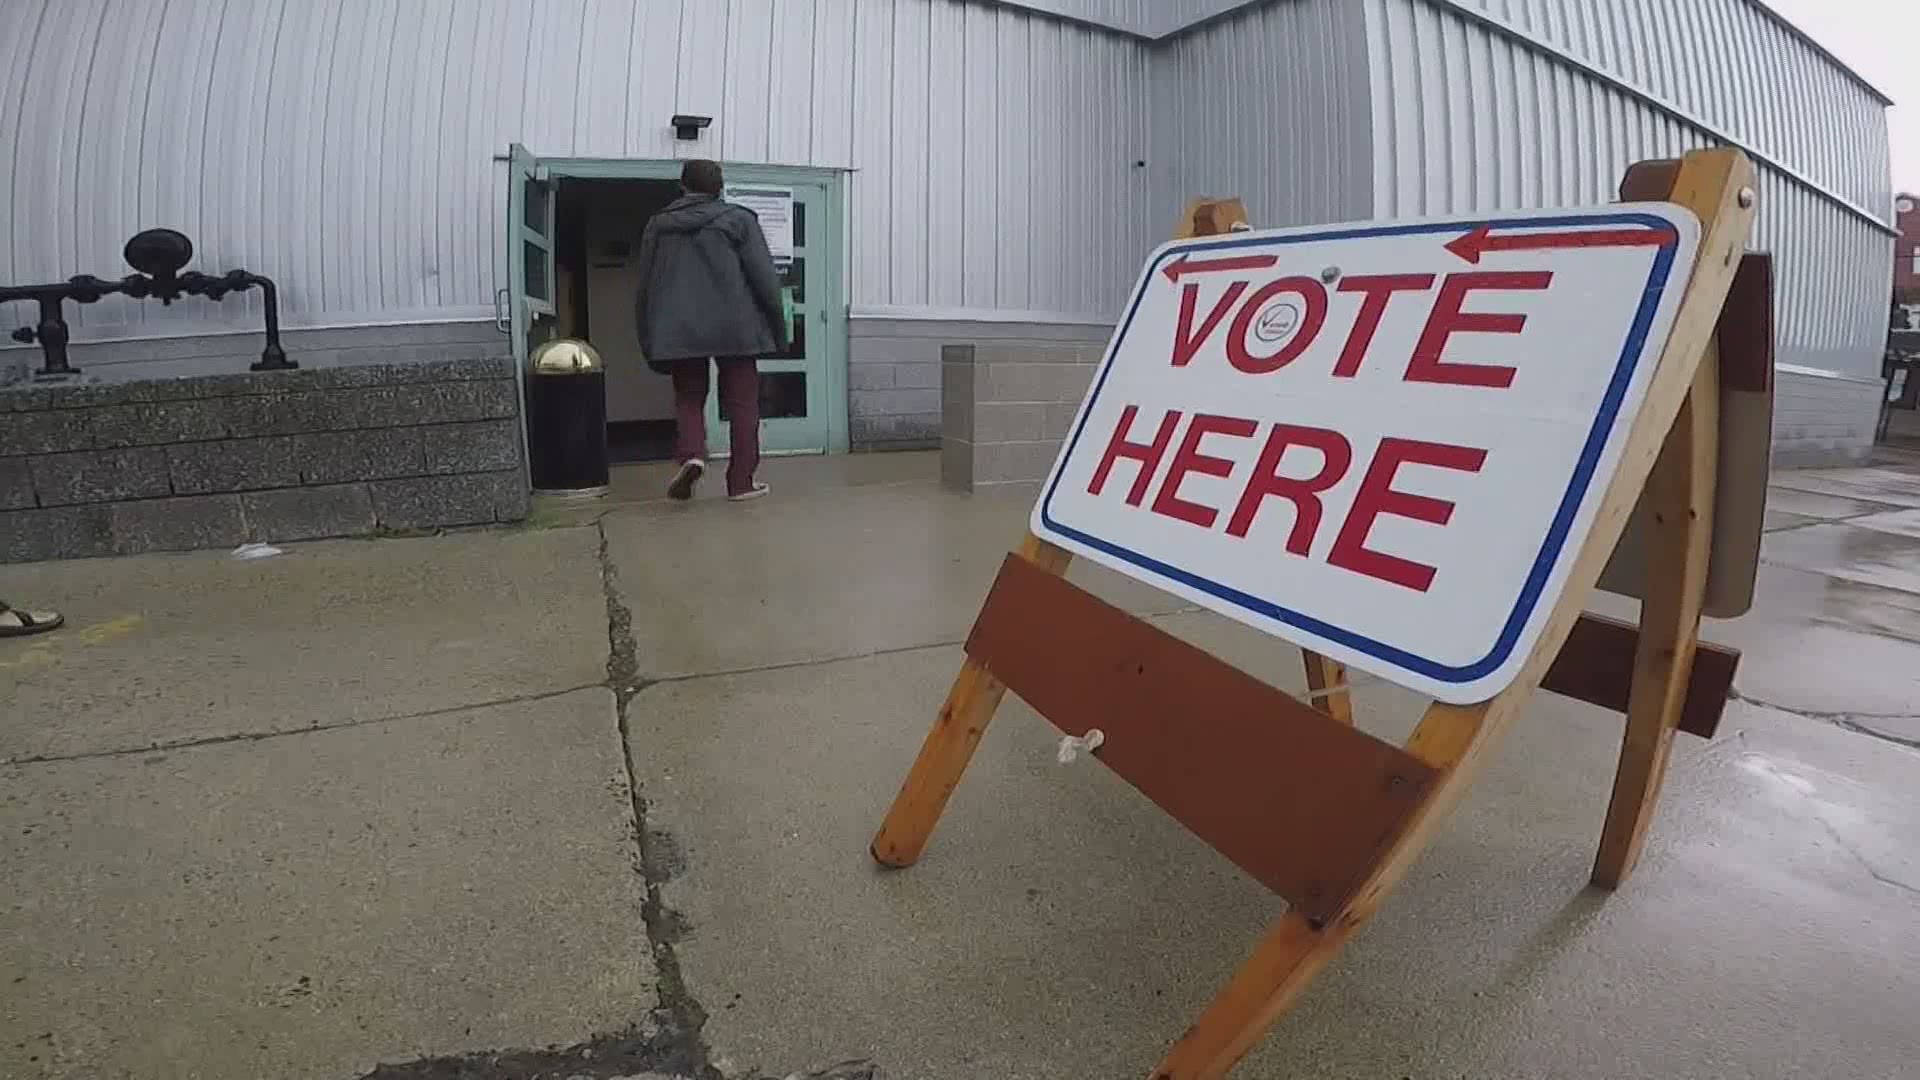 Dems have wide lead in voter registrations in Maine